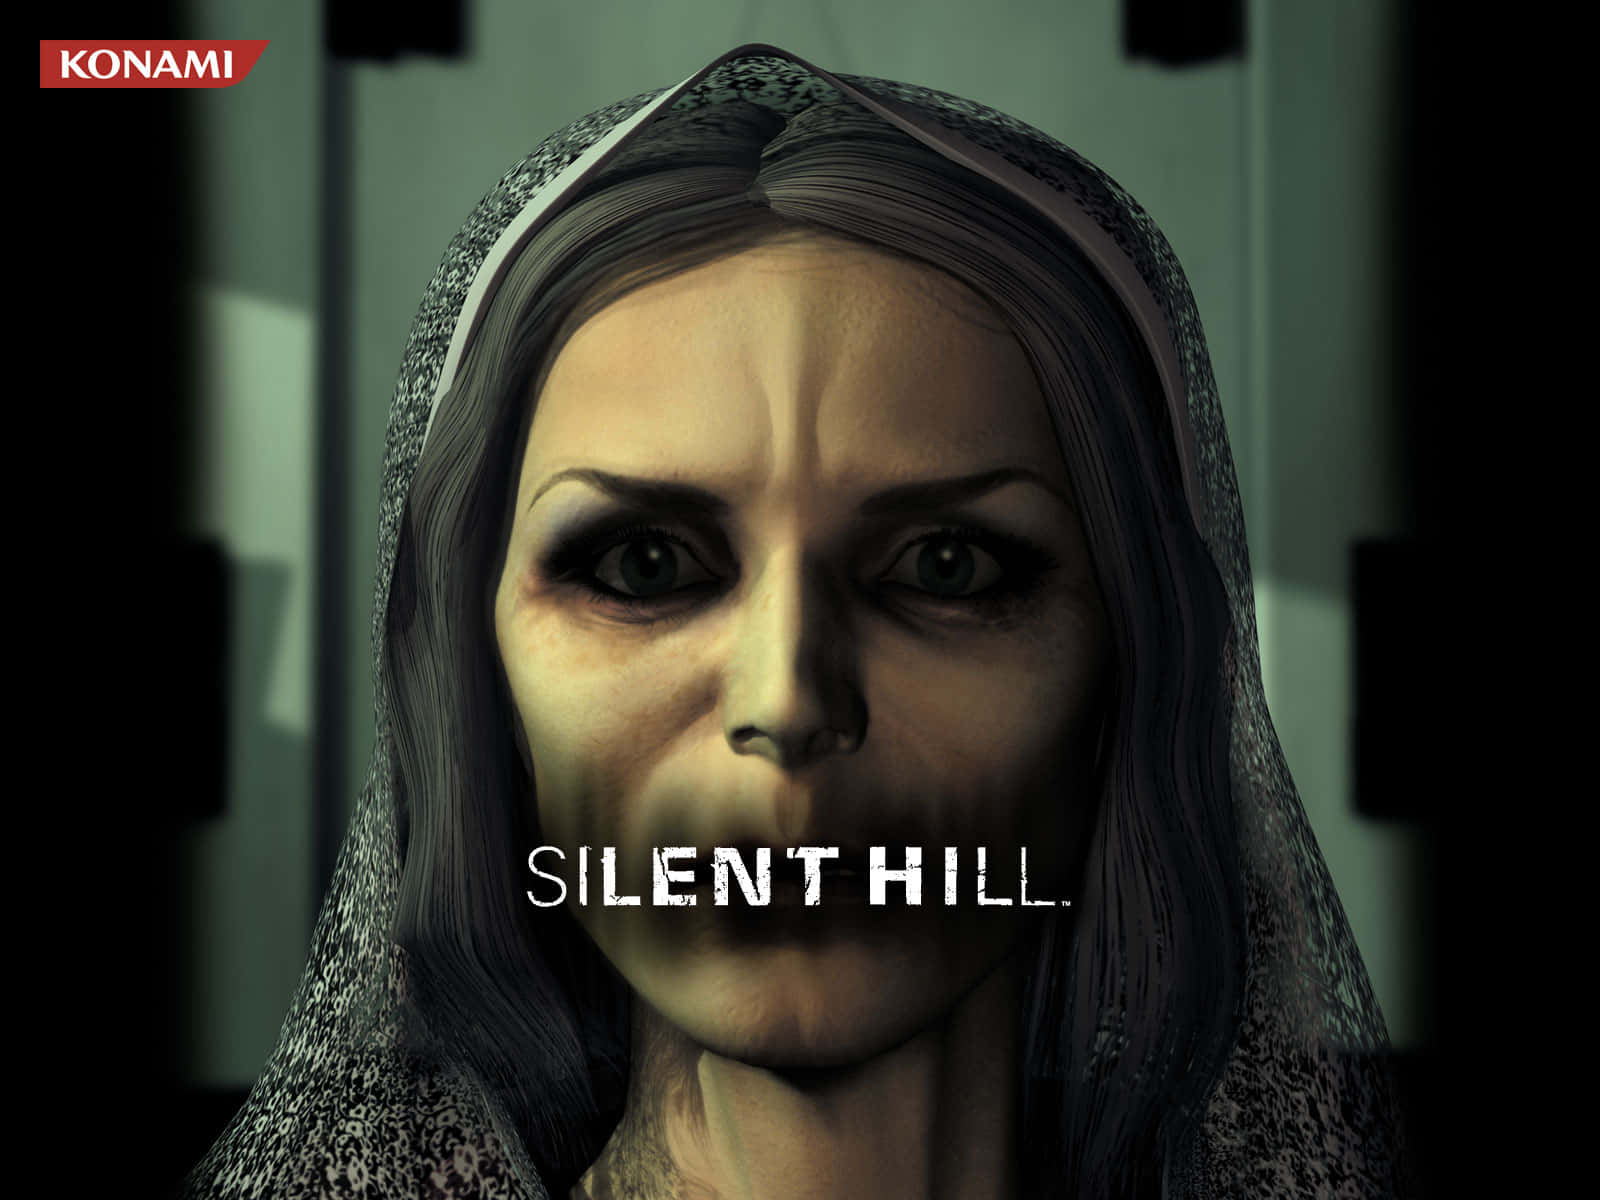 Explore and Survive the Town of Silent Hill